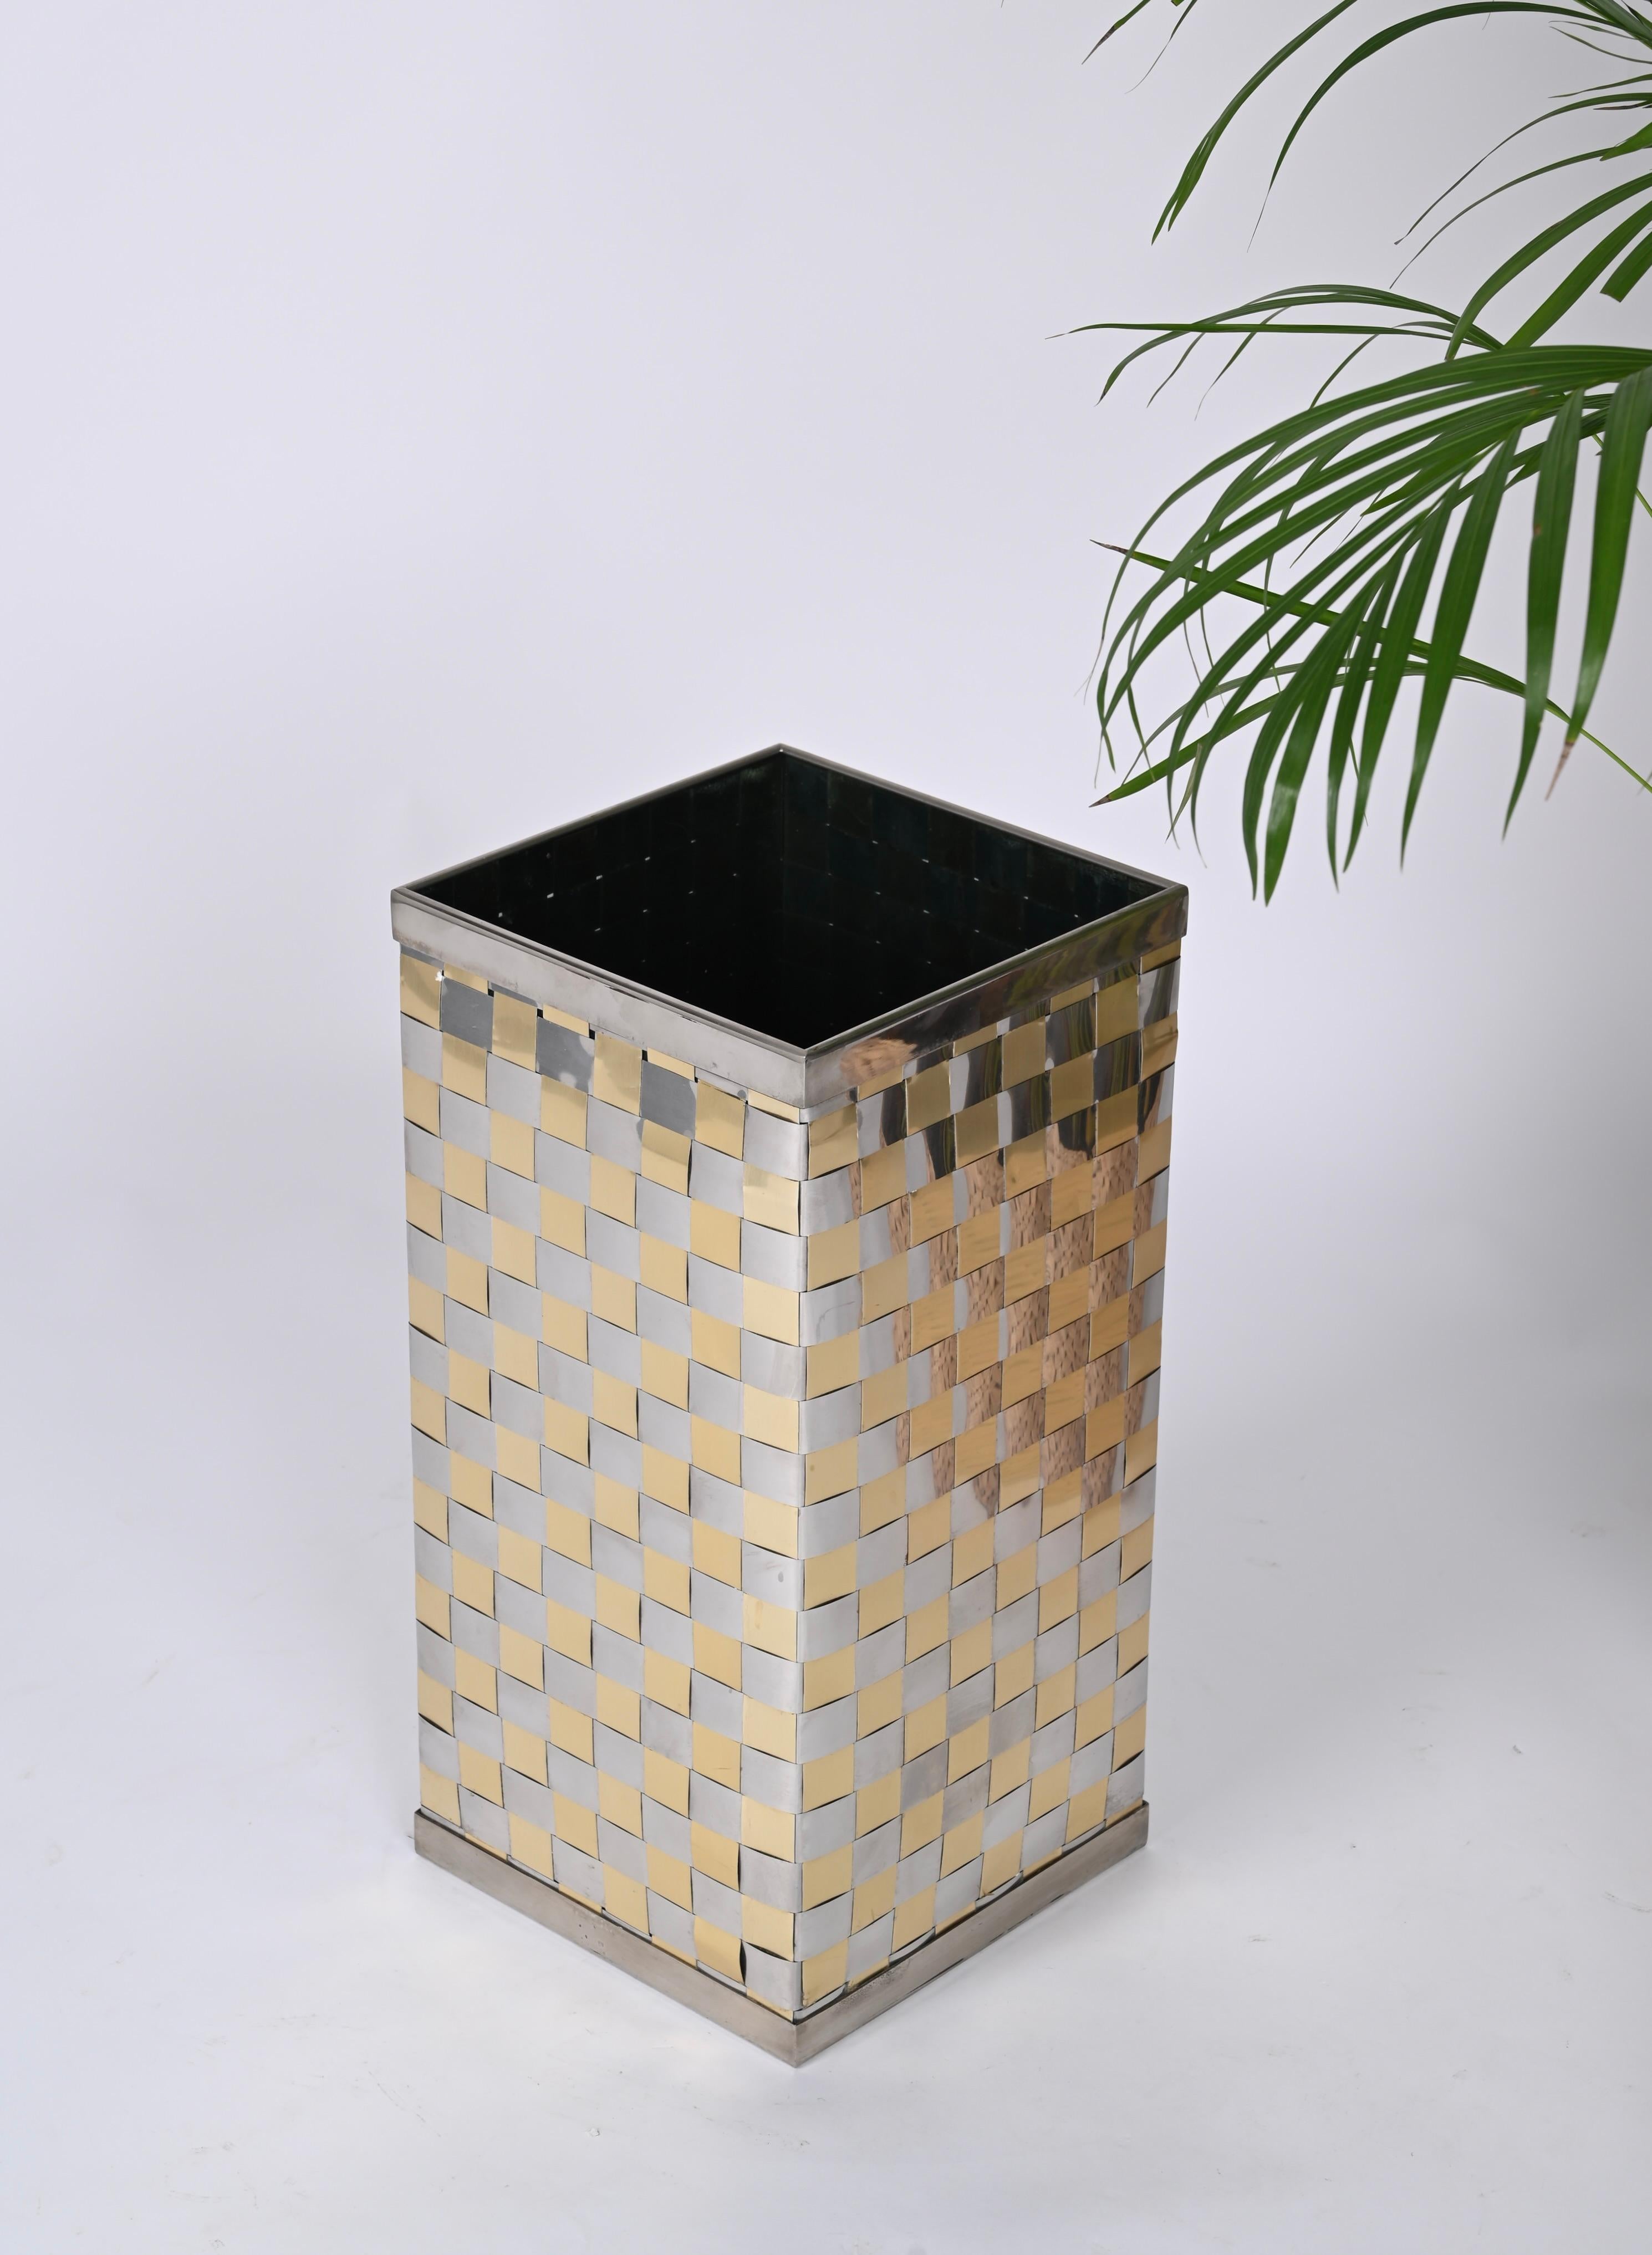 Splendid square umbrella stand in brass and chrome. This stunning piece was designed in the Italy in the 70s in the style of Willy Rizzo.

The umbrella stand consists of an elegant weave of chrome and brass, the contrast between the brass and the